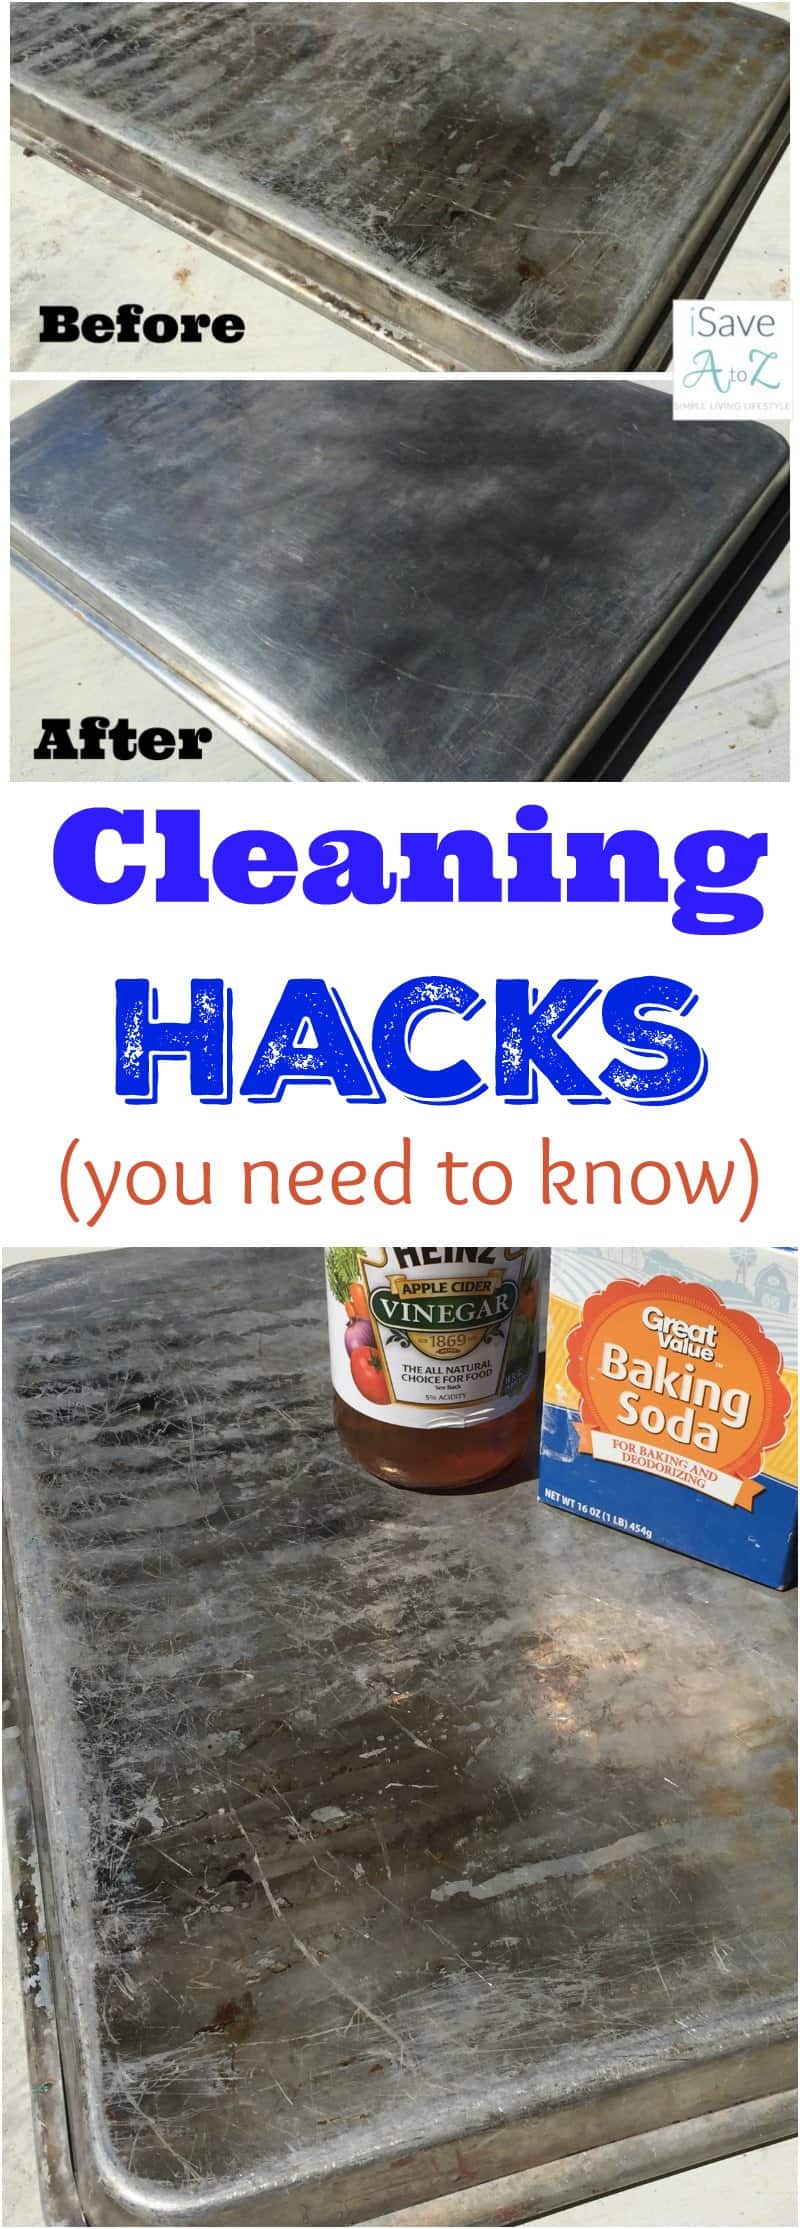 Baking Soda and Vinegar Uses you NEED to know!